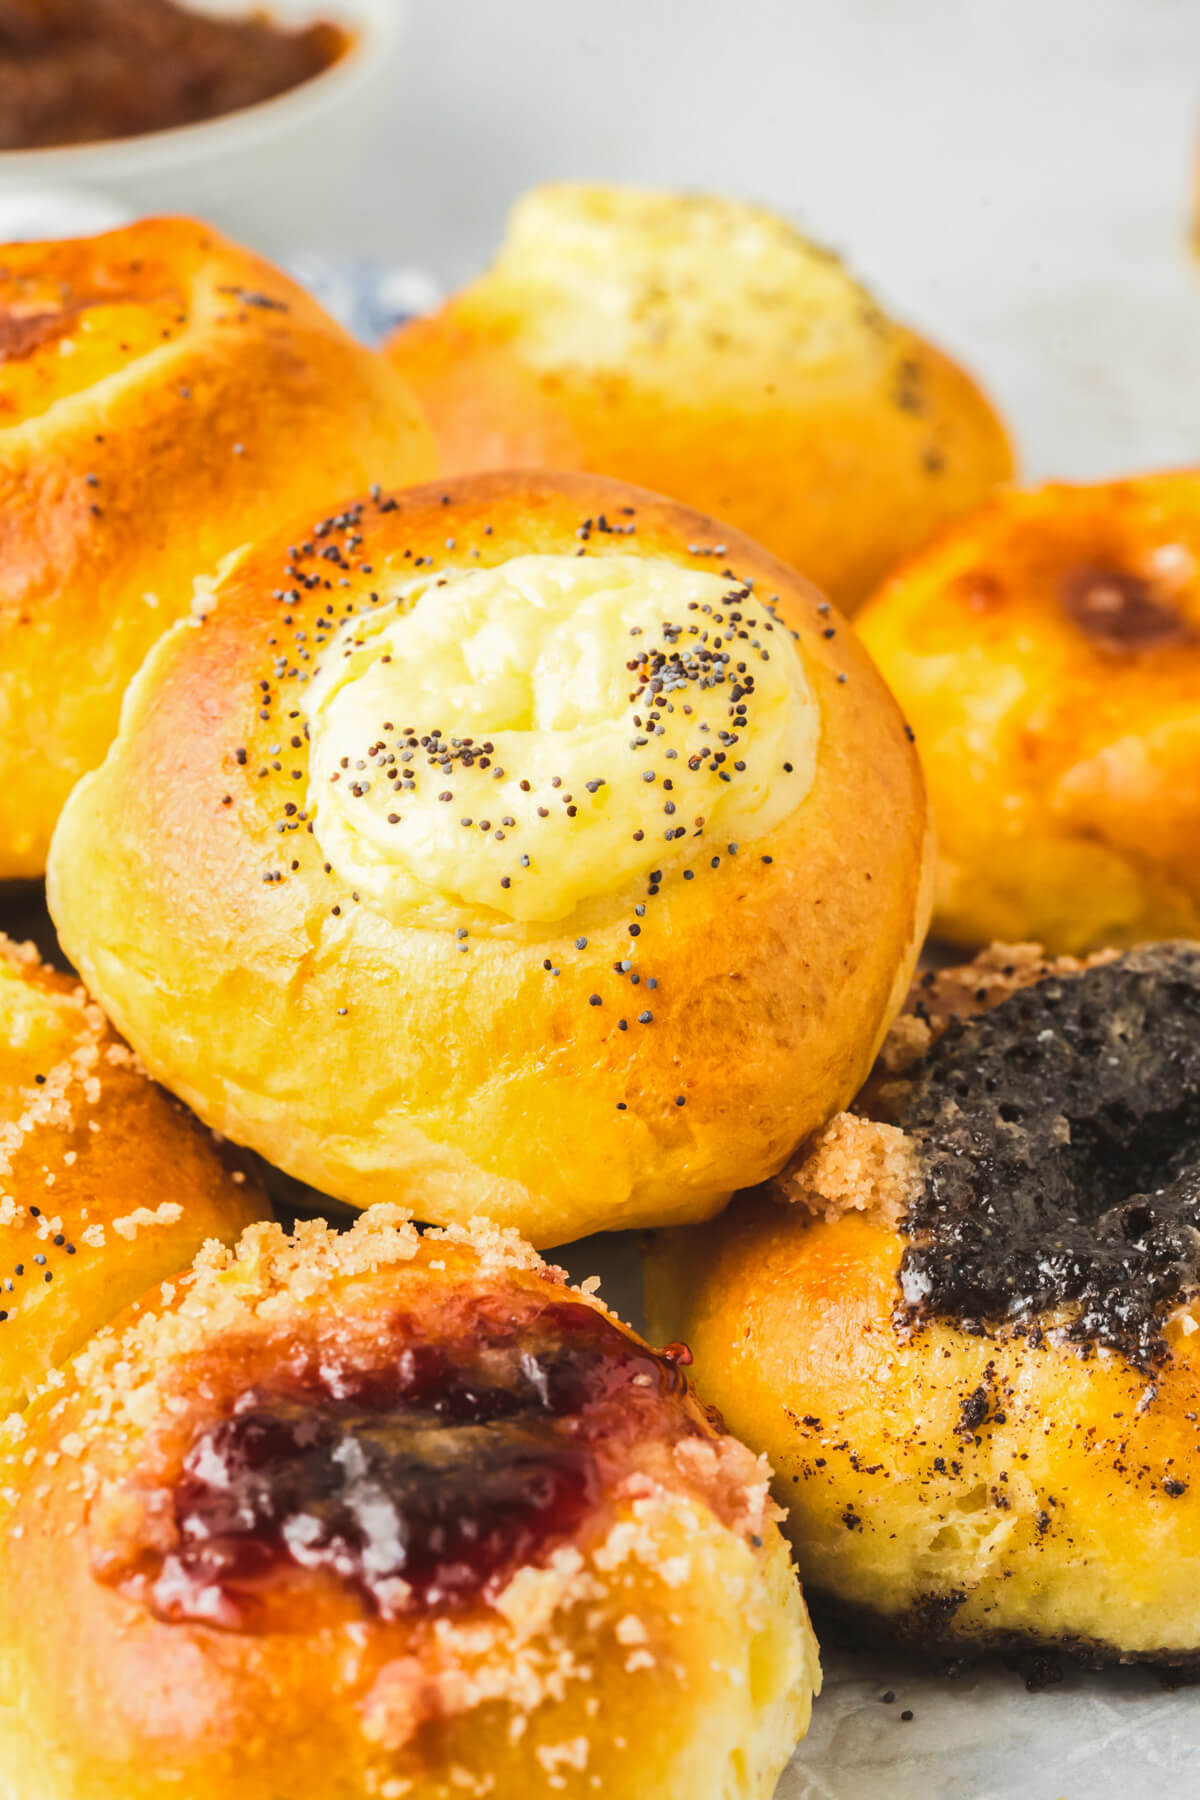 A plate full of golden baked kolaches filled with a variety of fillings.